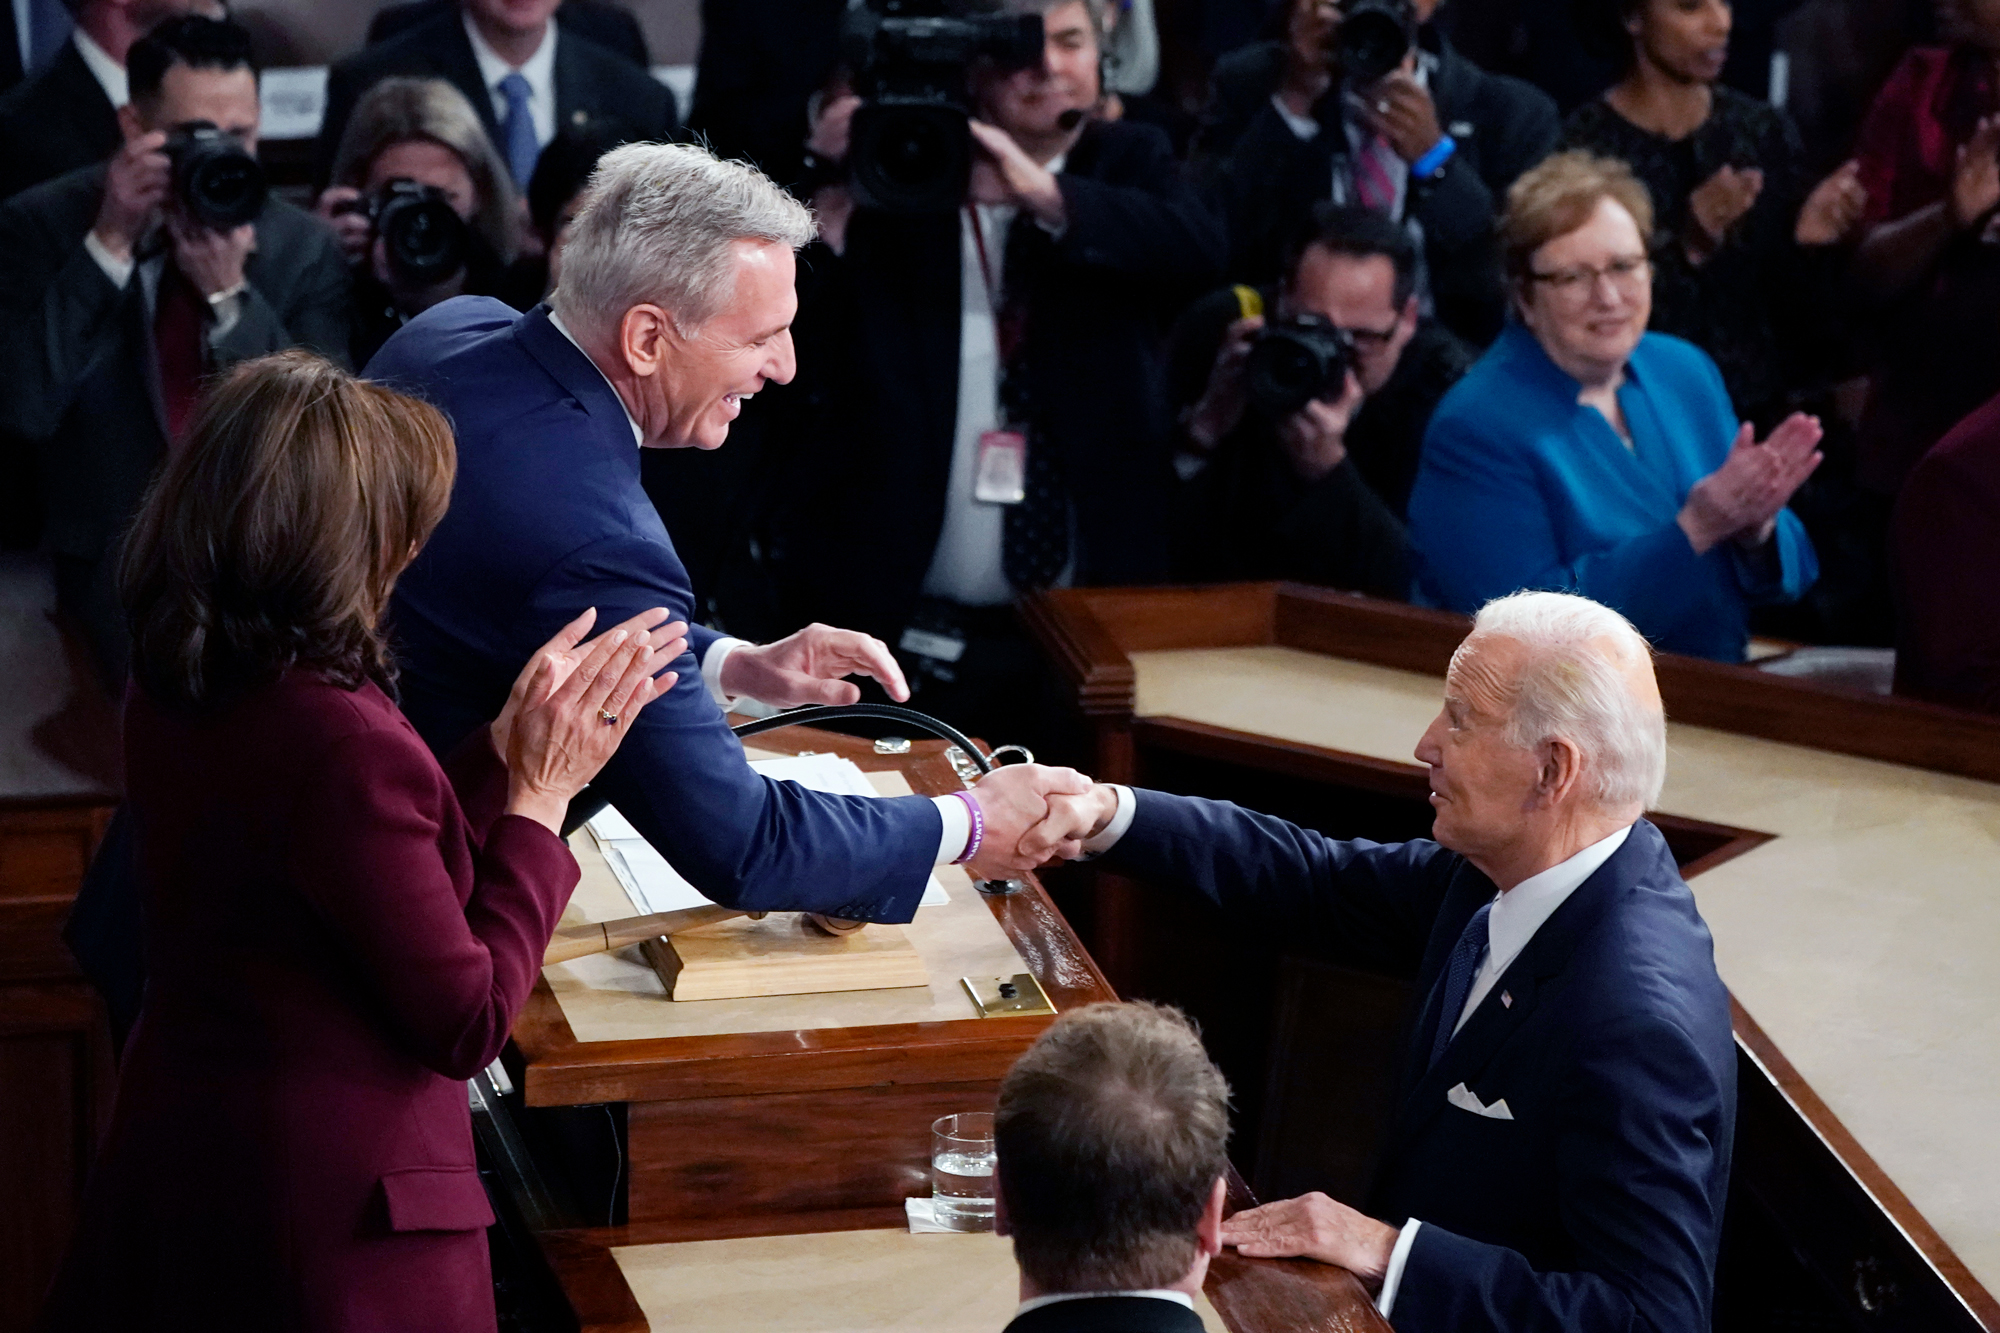 PHOTO: President Joe Biden arrives and shakes hands with House Speaker Kevin McCarthy of Calif., before he delivers his State of the Union speech to a joint session of Congress, at the Capitol in Washington, Feb. 7, 2023.